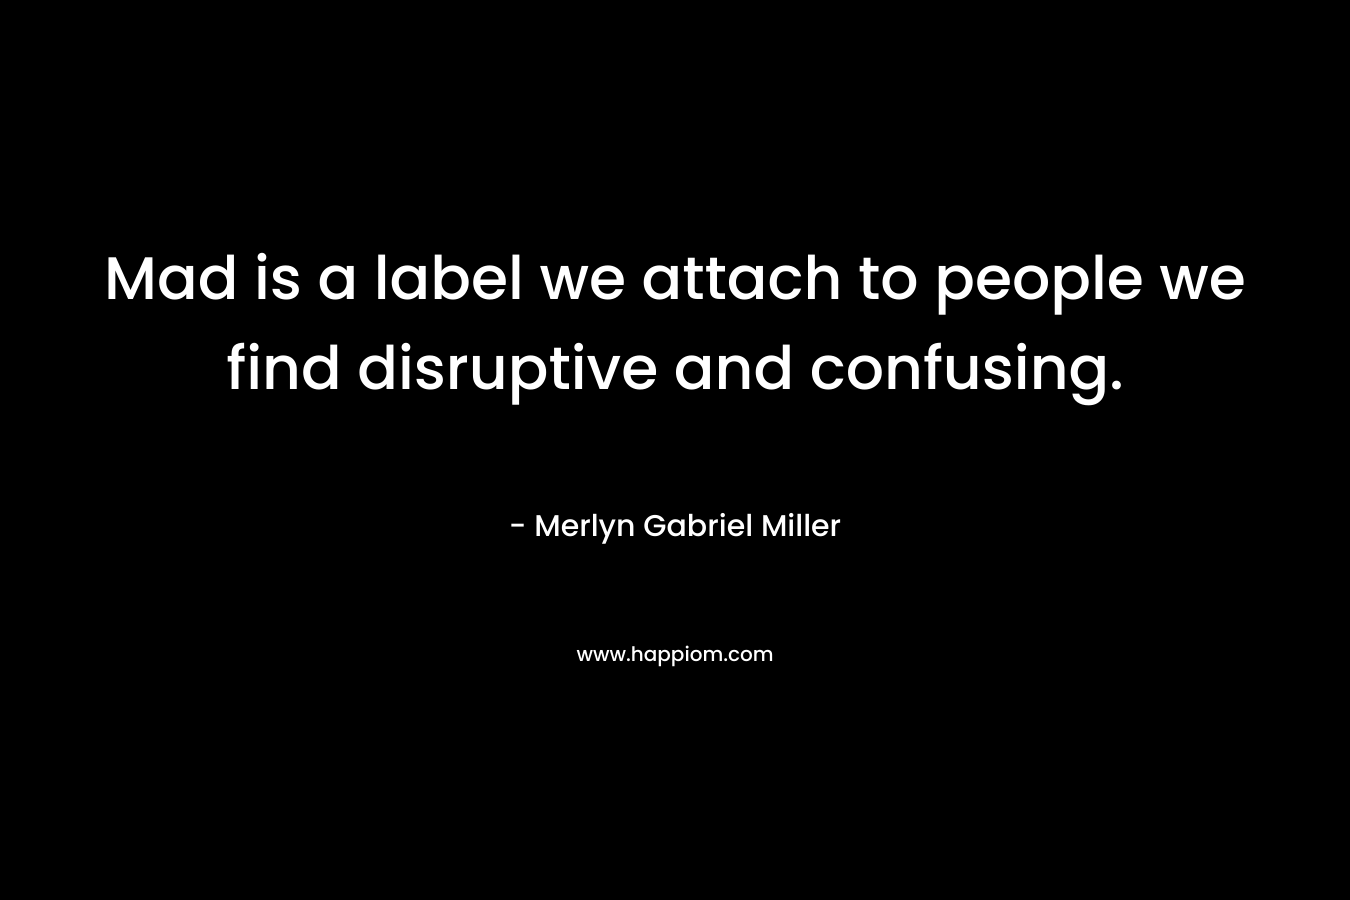 Mad is a label we attach to people we find disruptive and confusing. – Merlyn Gabriel Miller